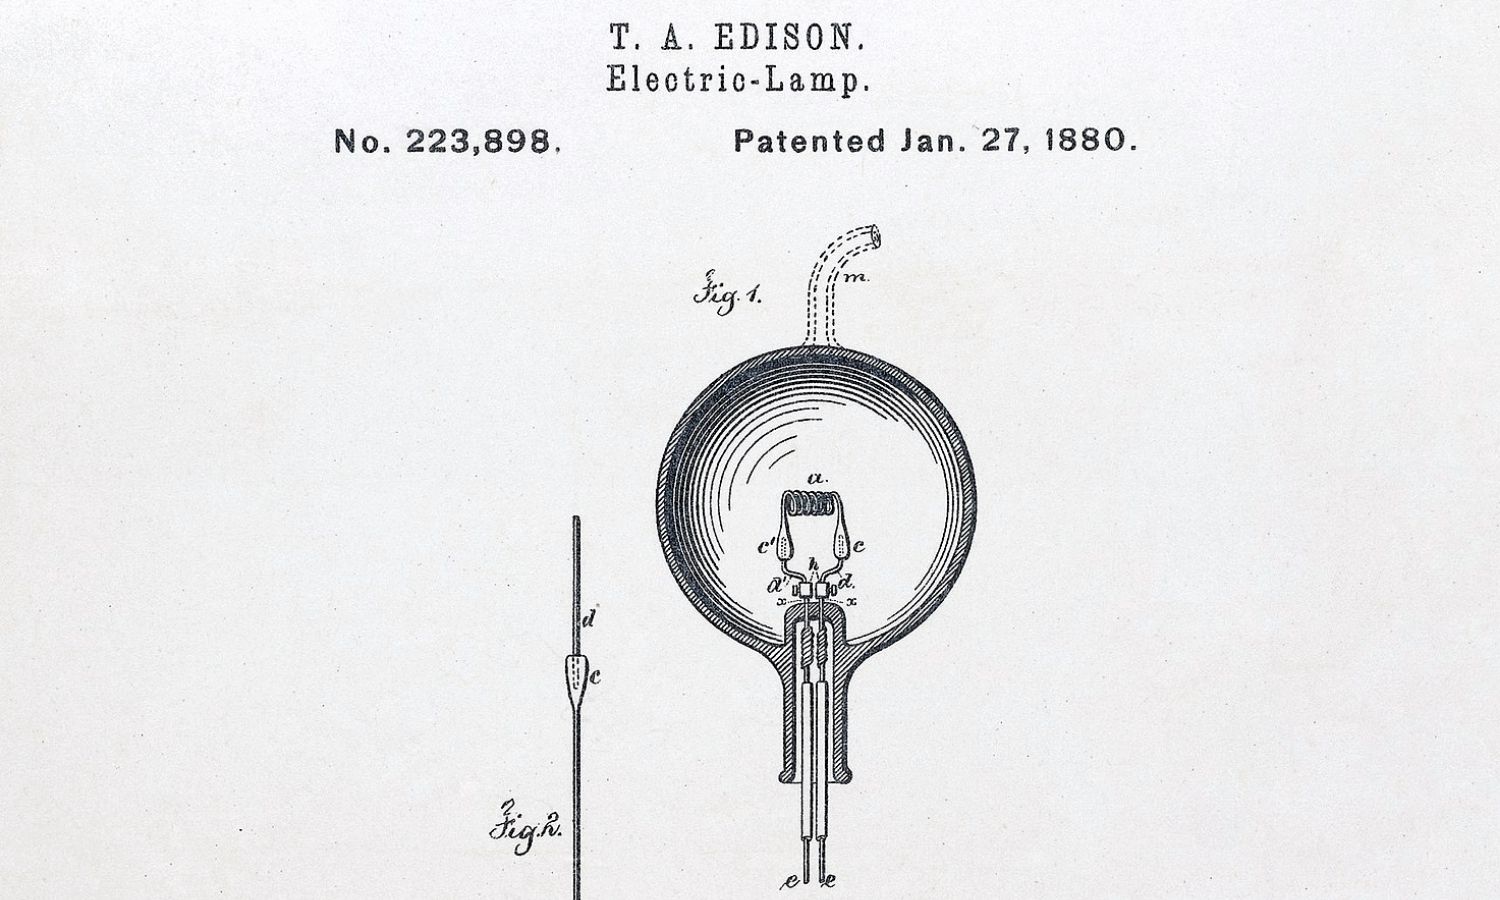 OTD in 1880: A patent for his electric lamp invention was given to Thomas Edison.